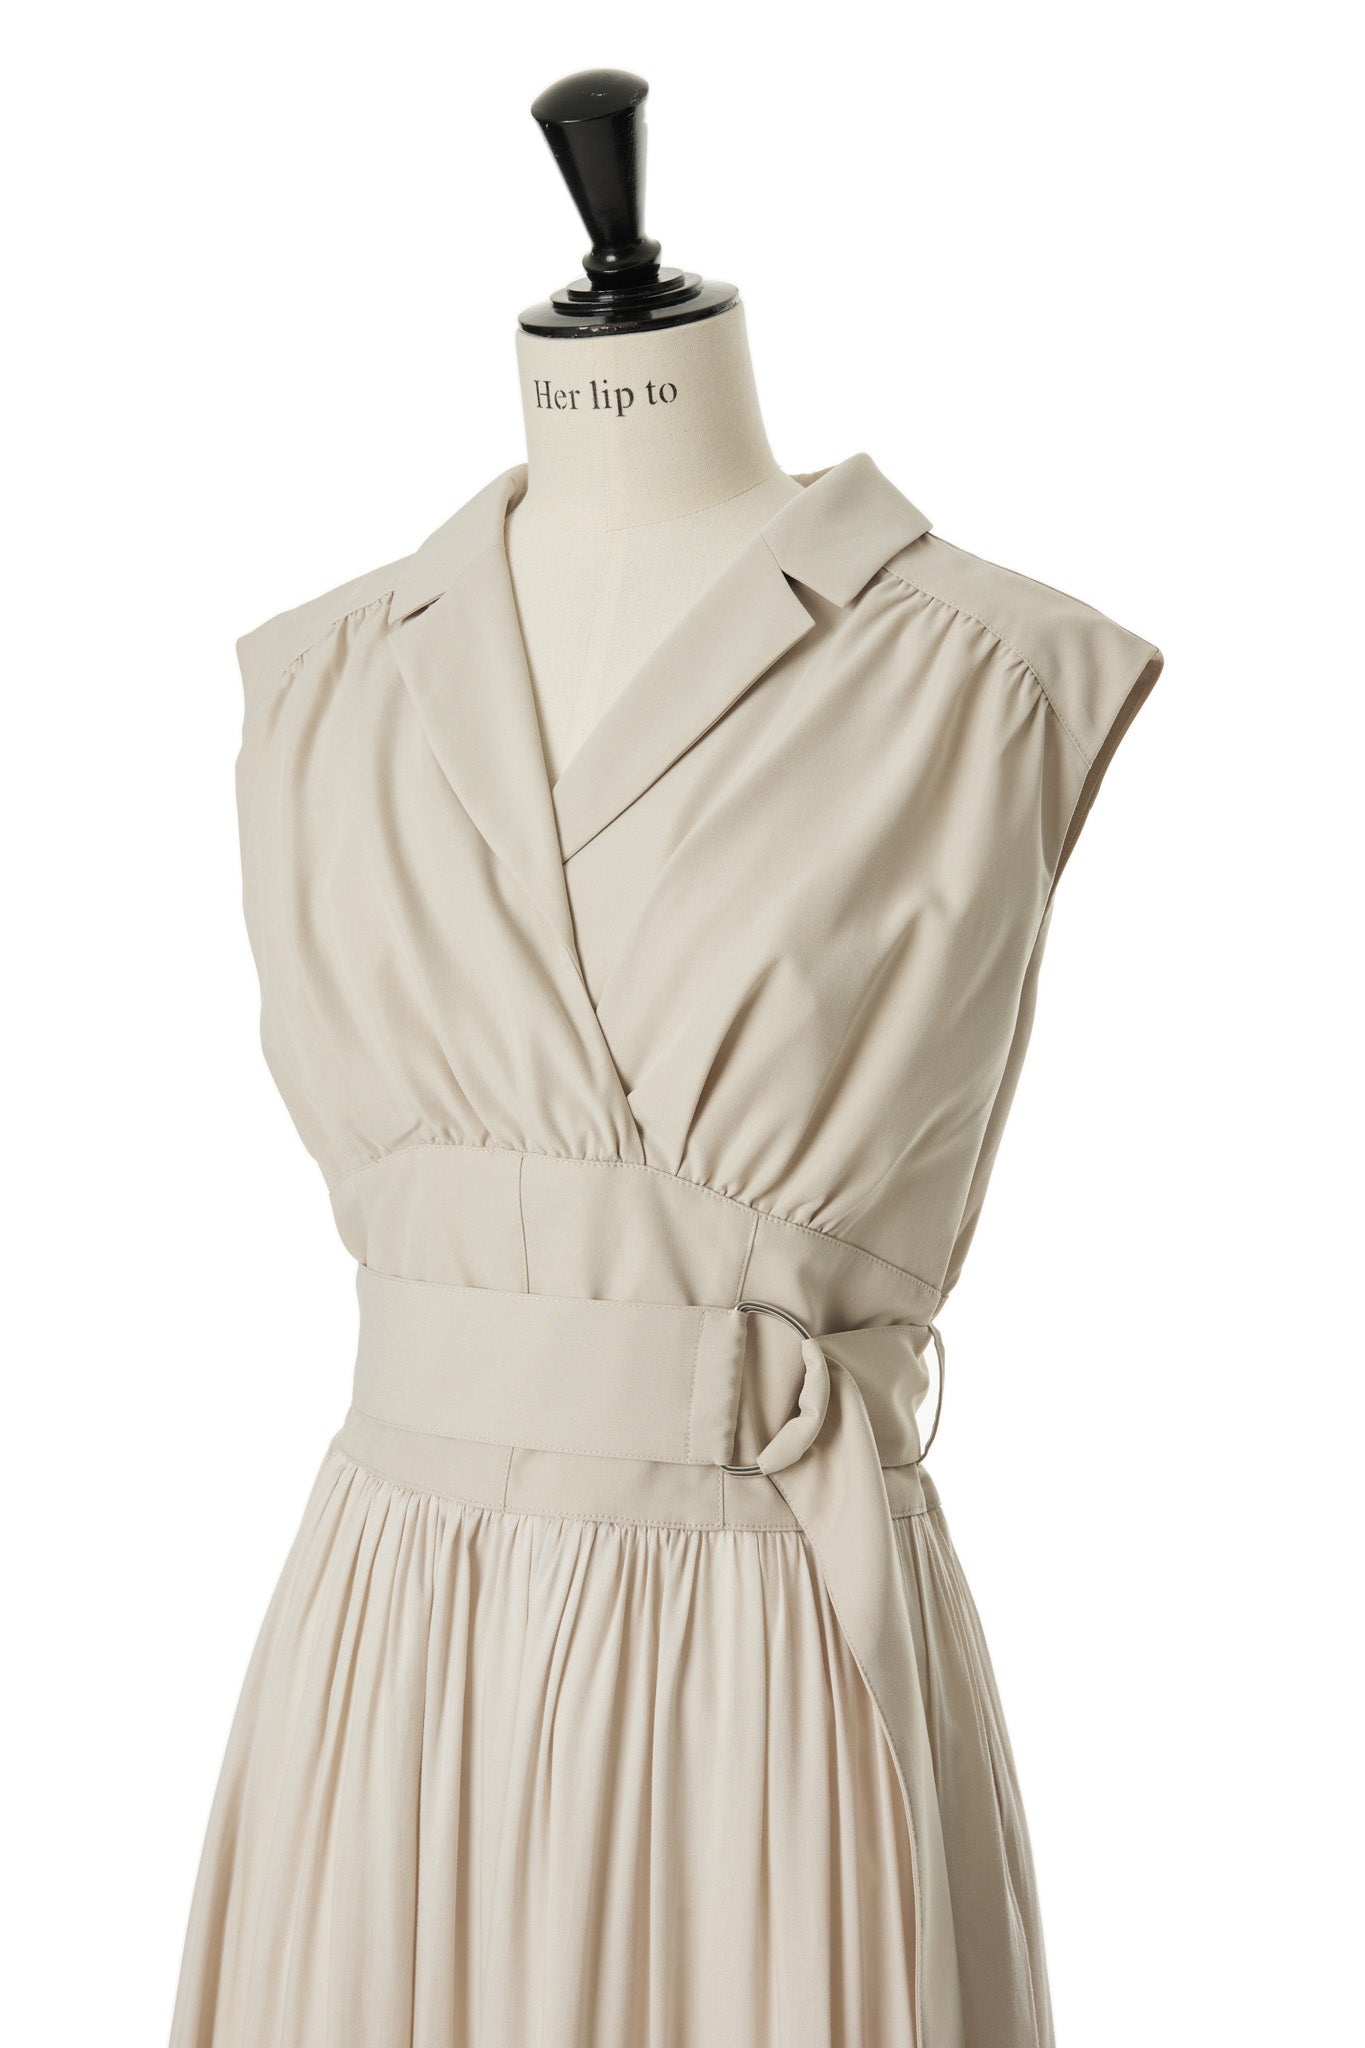 herlipto Classic Oxford Belted Dress